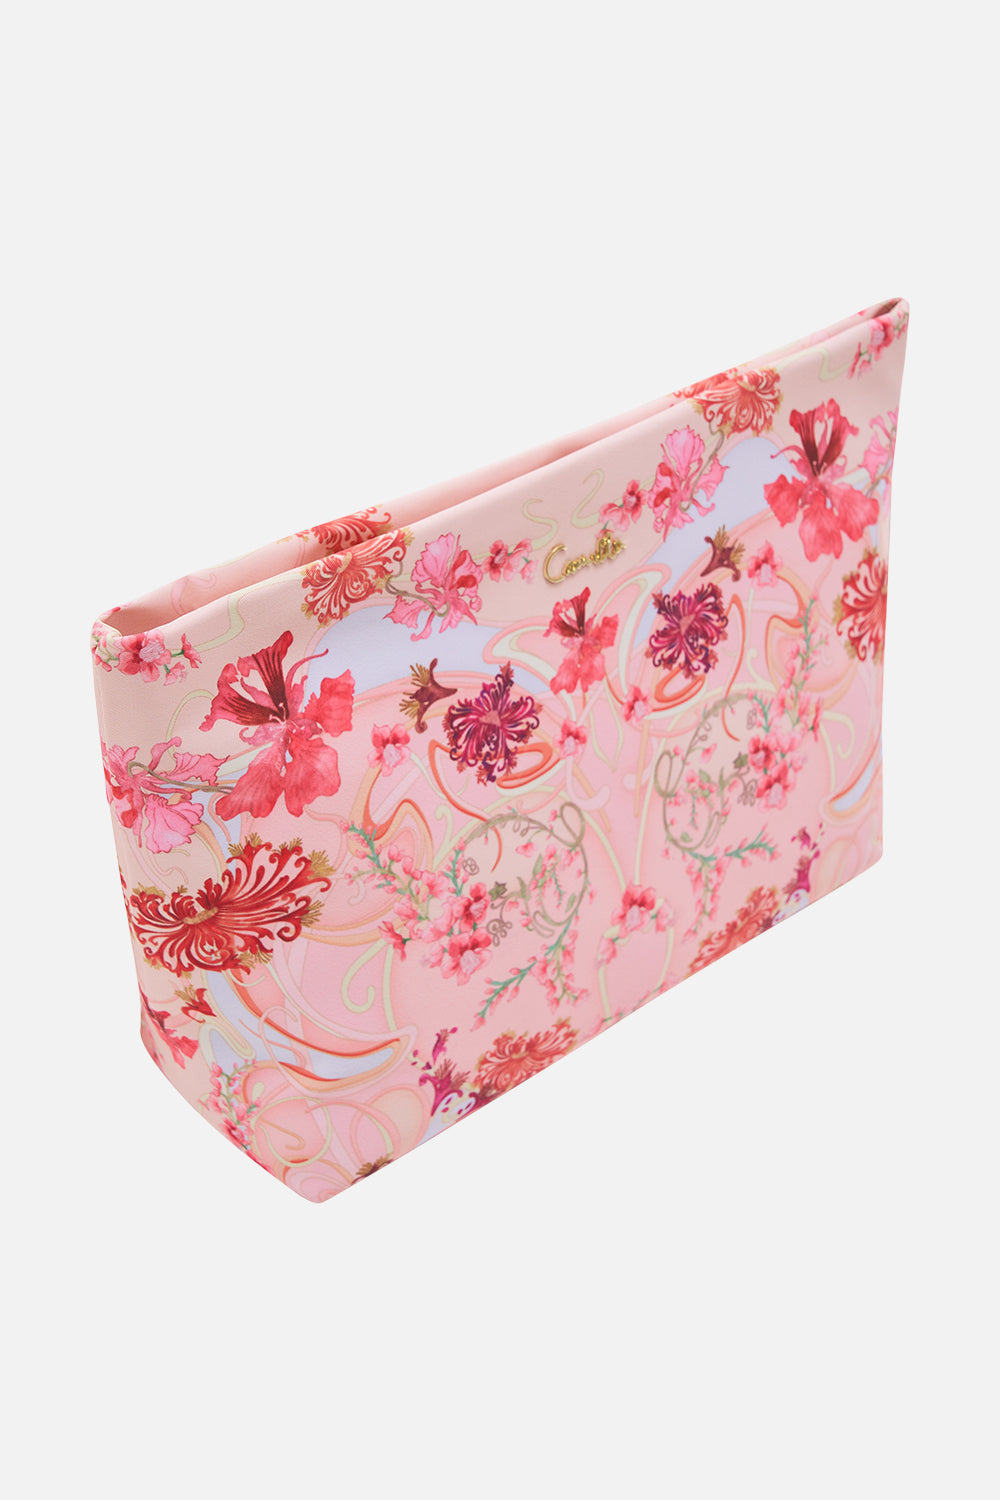 CAMILLA Floral Large Makeup Clutch in Blossoms and Brushstrokes print